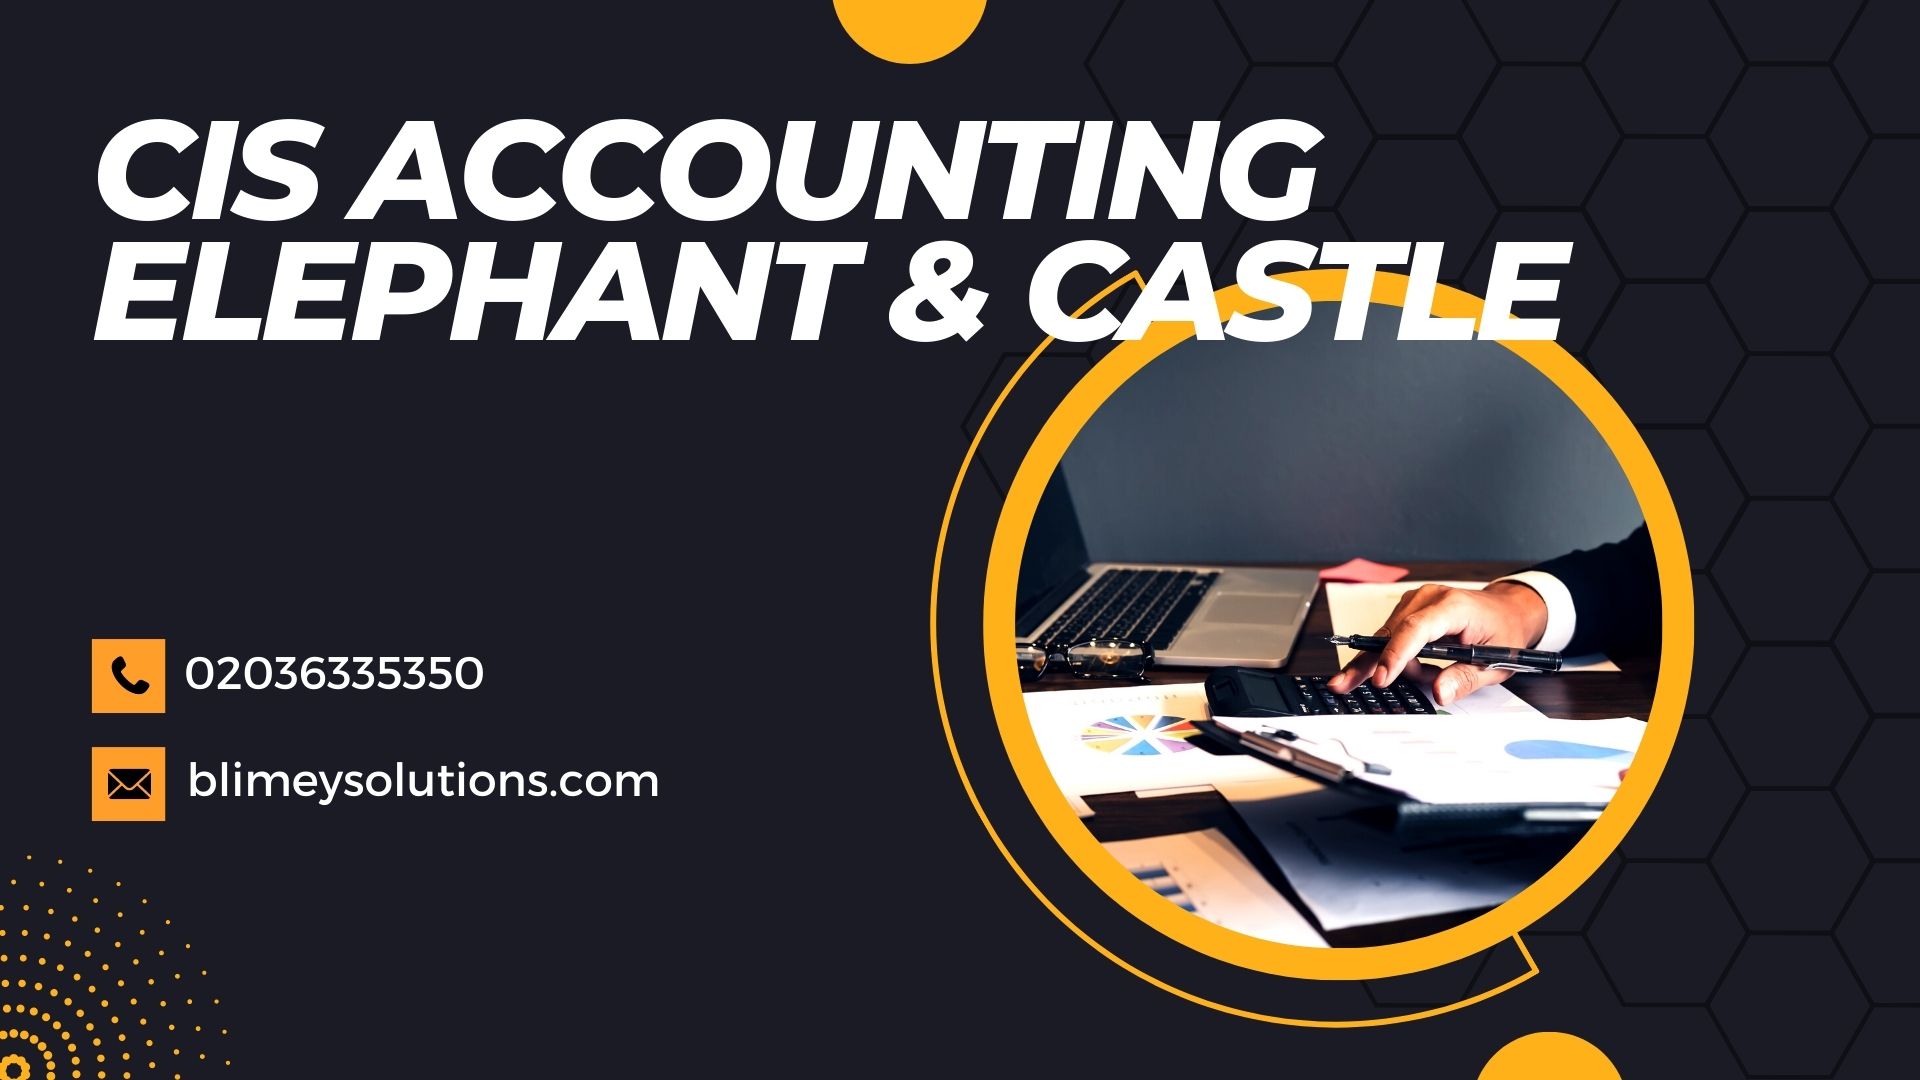 CIS Accounting in Elephant & Castle SE17 London